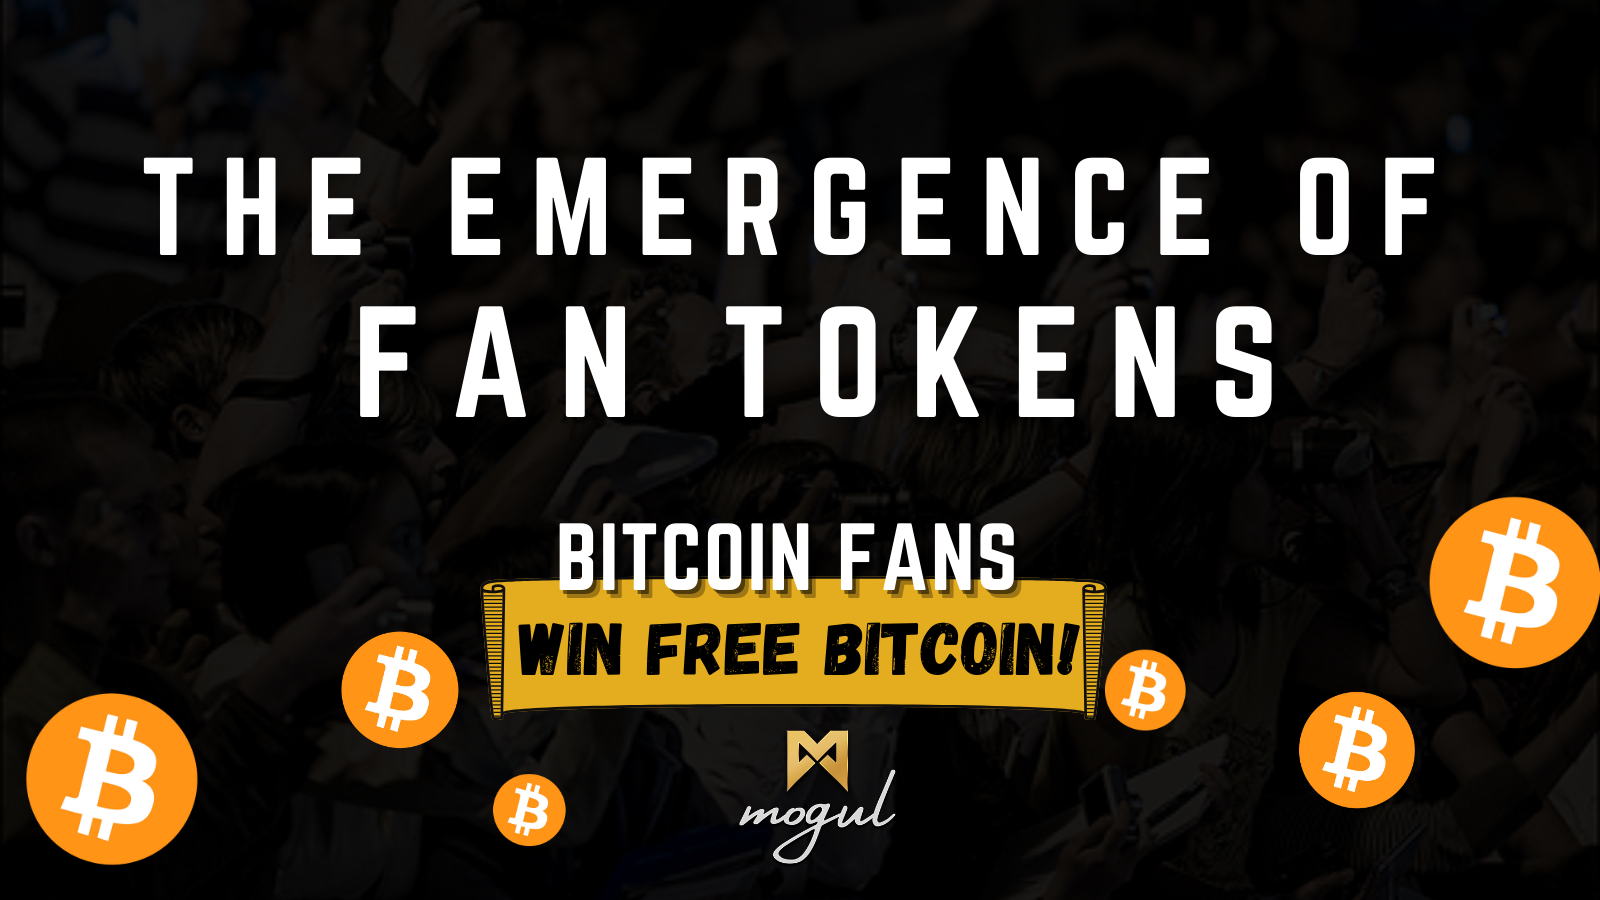 The Emergence of Fan Tokens